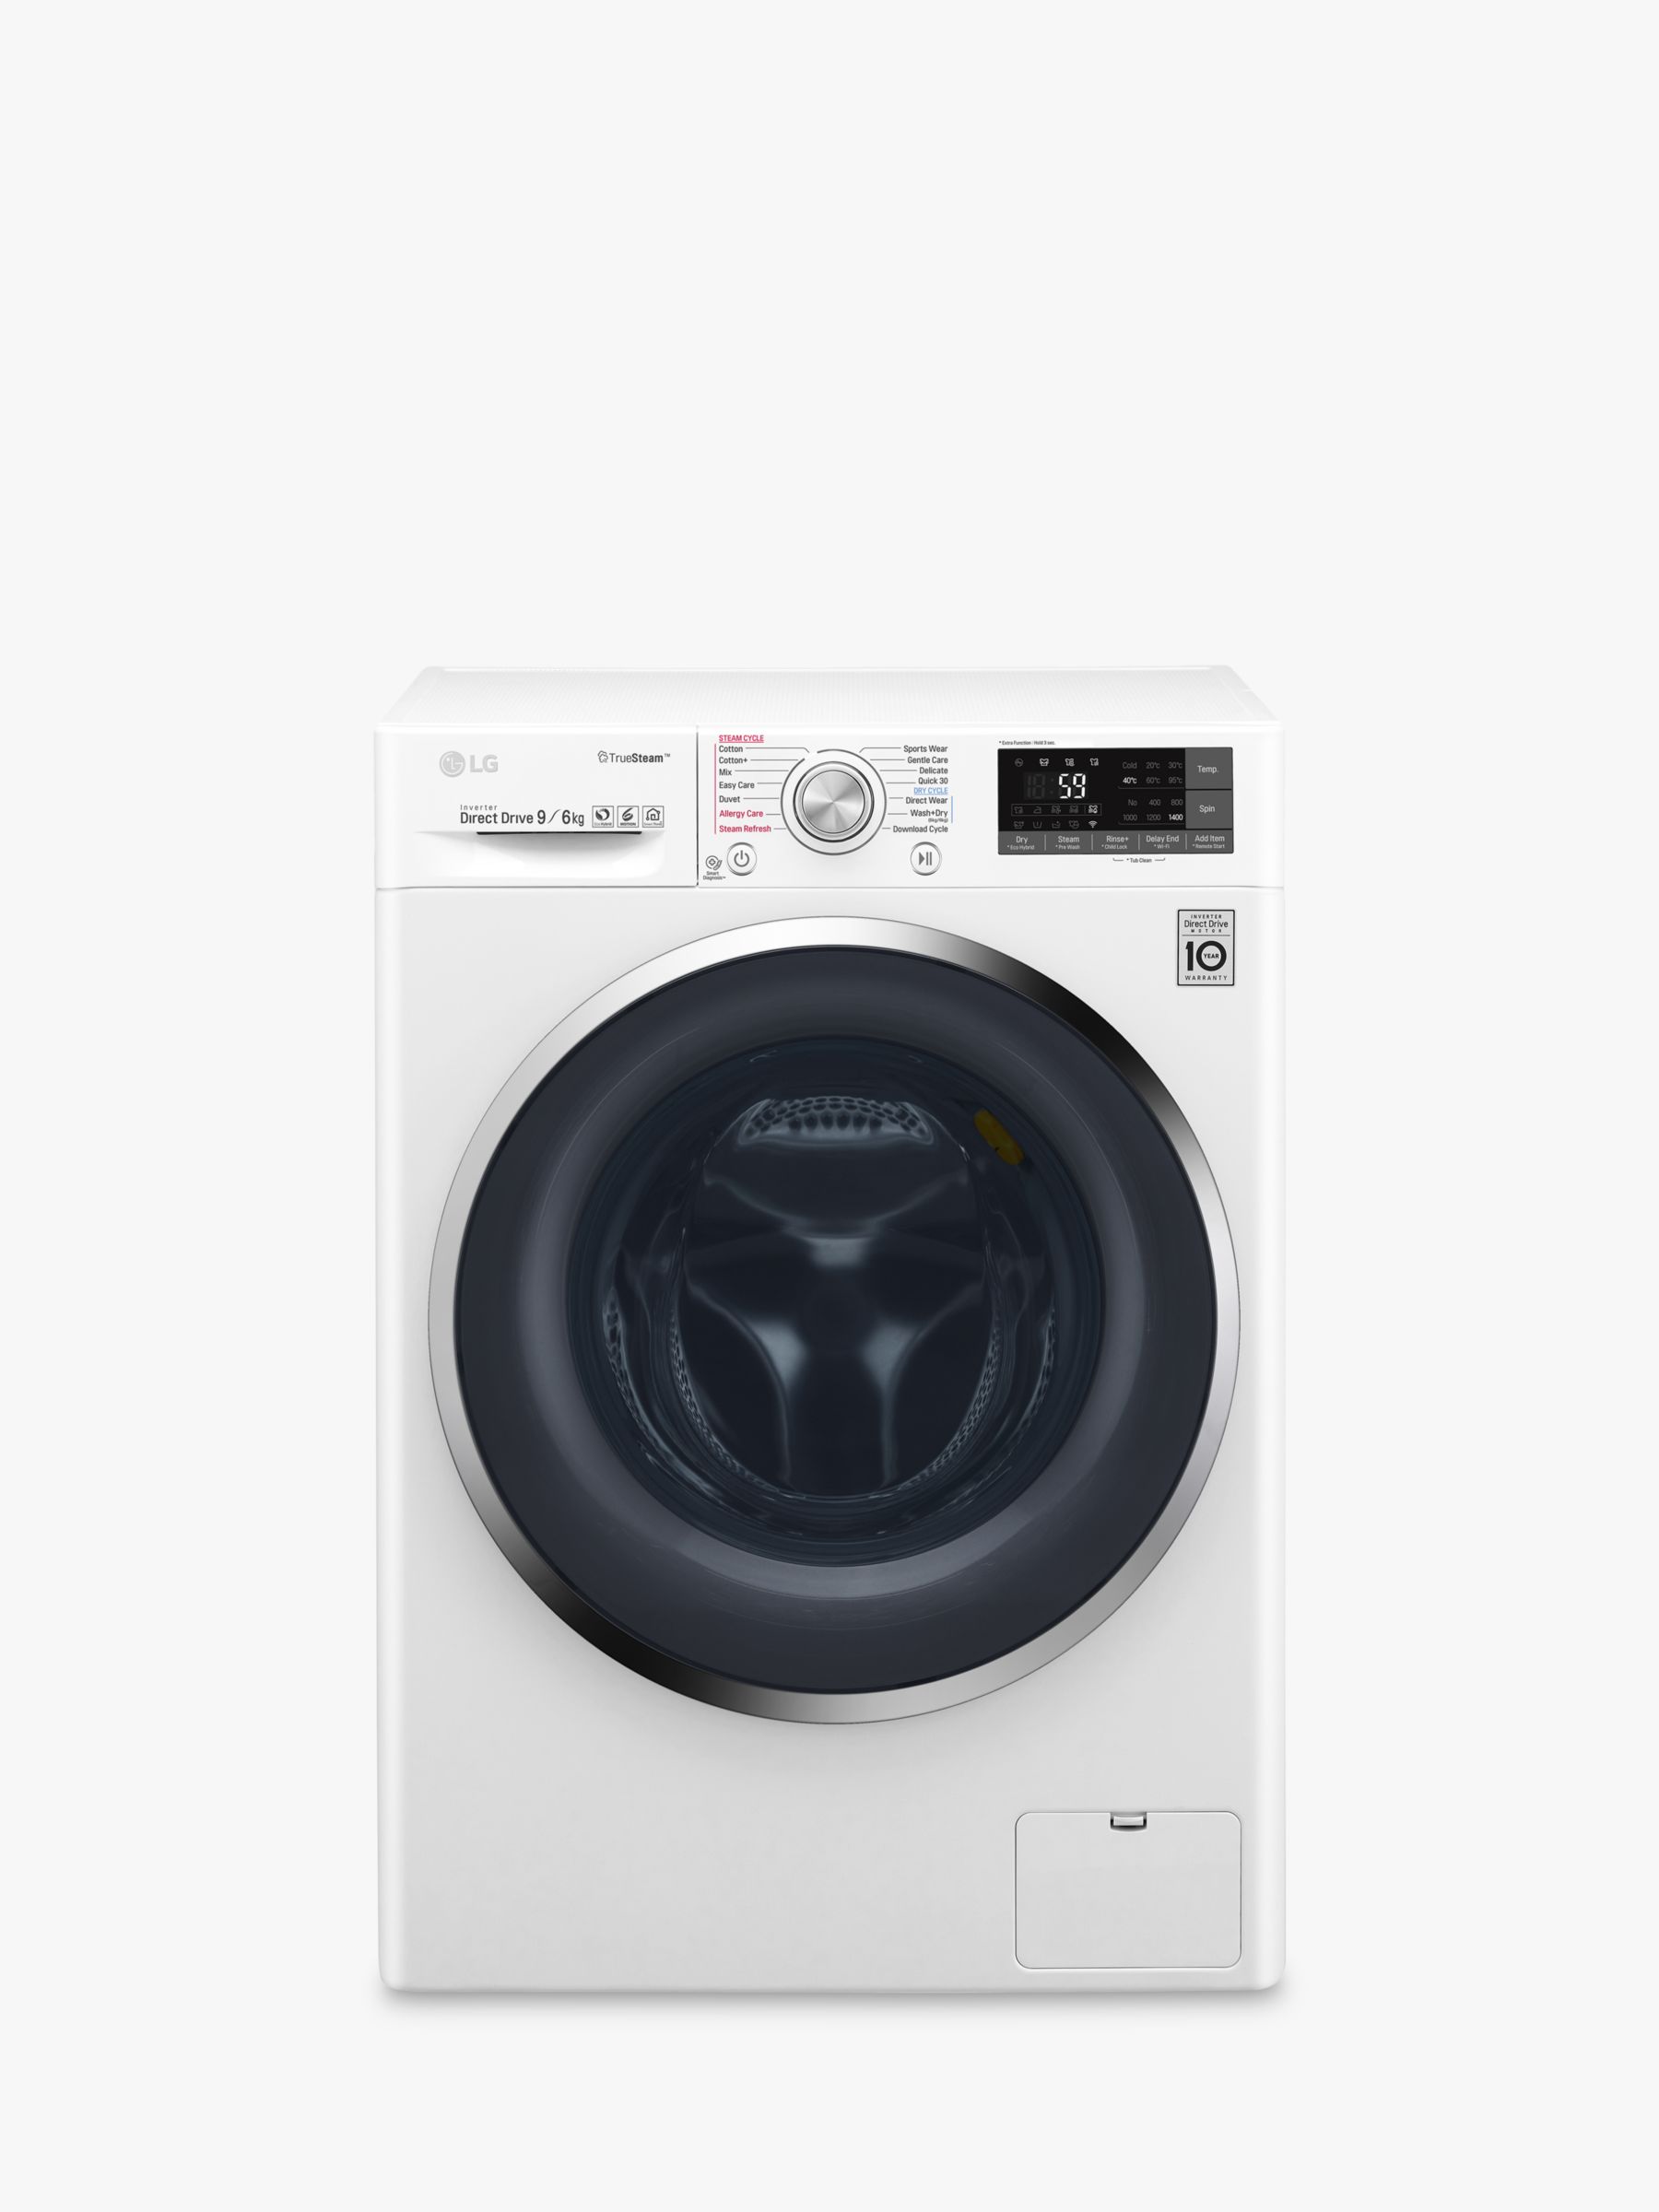 LG F4J8FH2W Freestanding Washer Dryer, 9kg Wash / 6kg Dry Load, A Energy Rating, 1400rpm Spin, White Review thumbnail